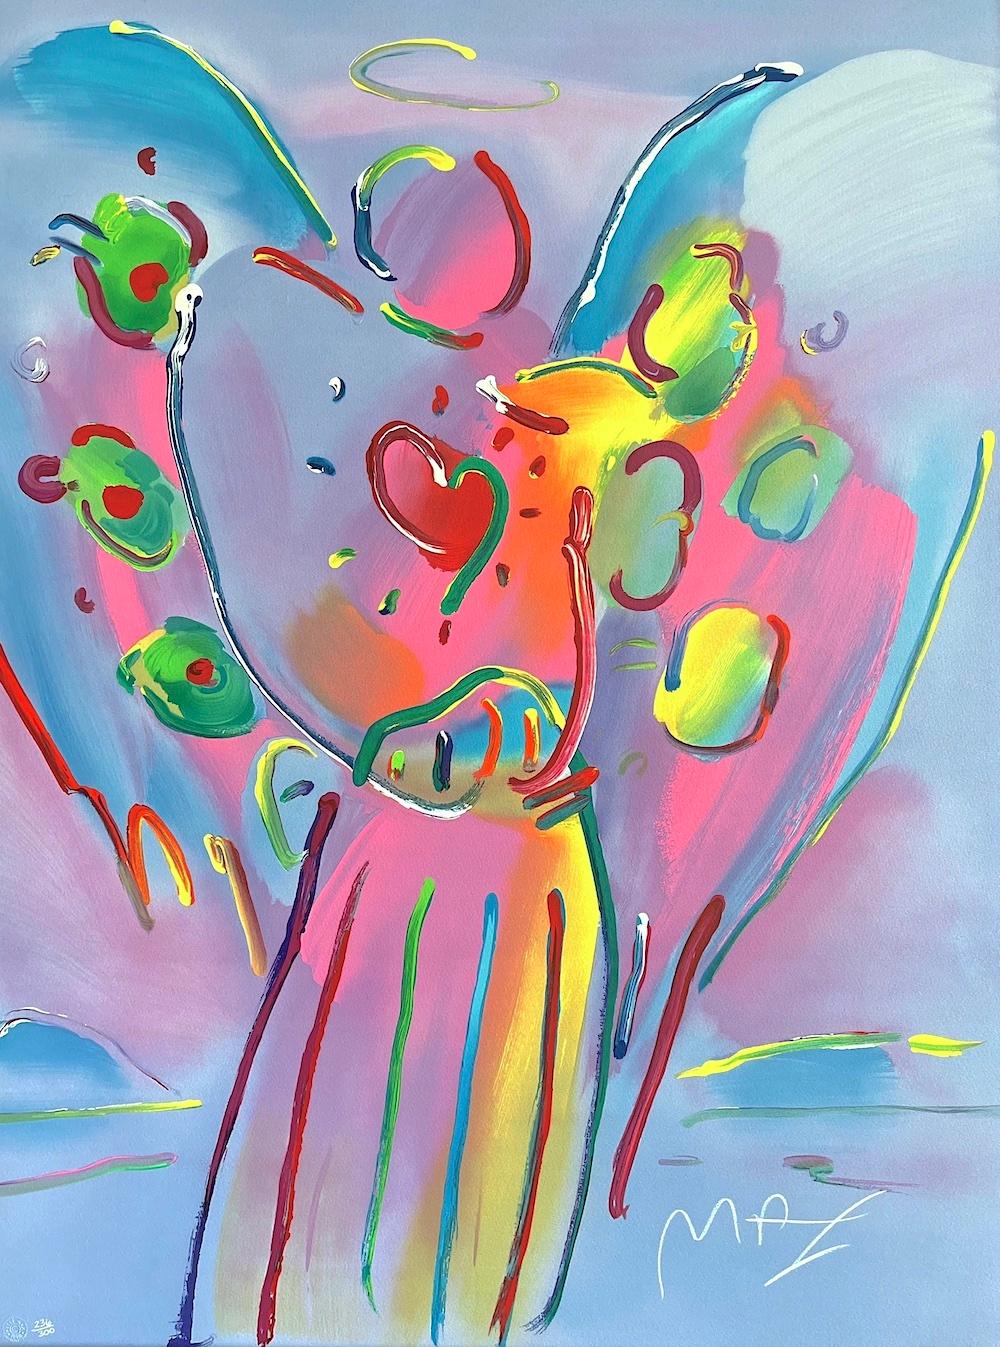 Peter Max Figurative Print - ANGEL WITH HEART Signed Lithograph, Guardian Angel, Red Heart, Rainbow Colors